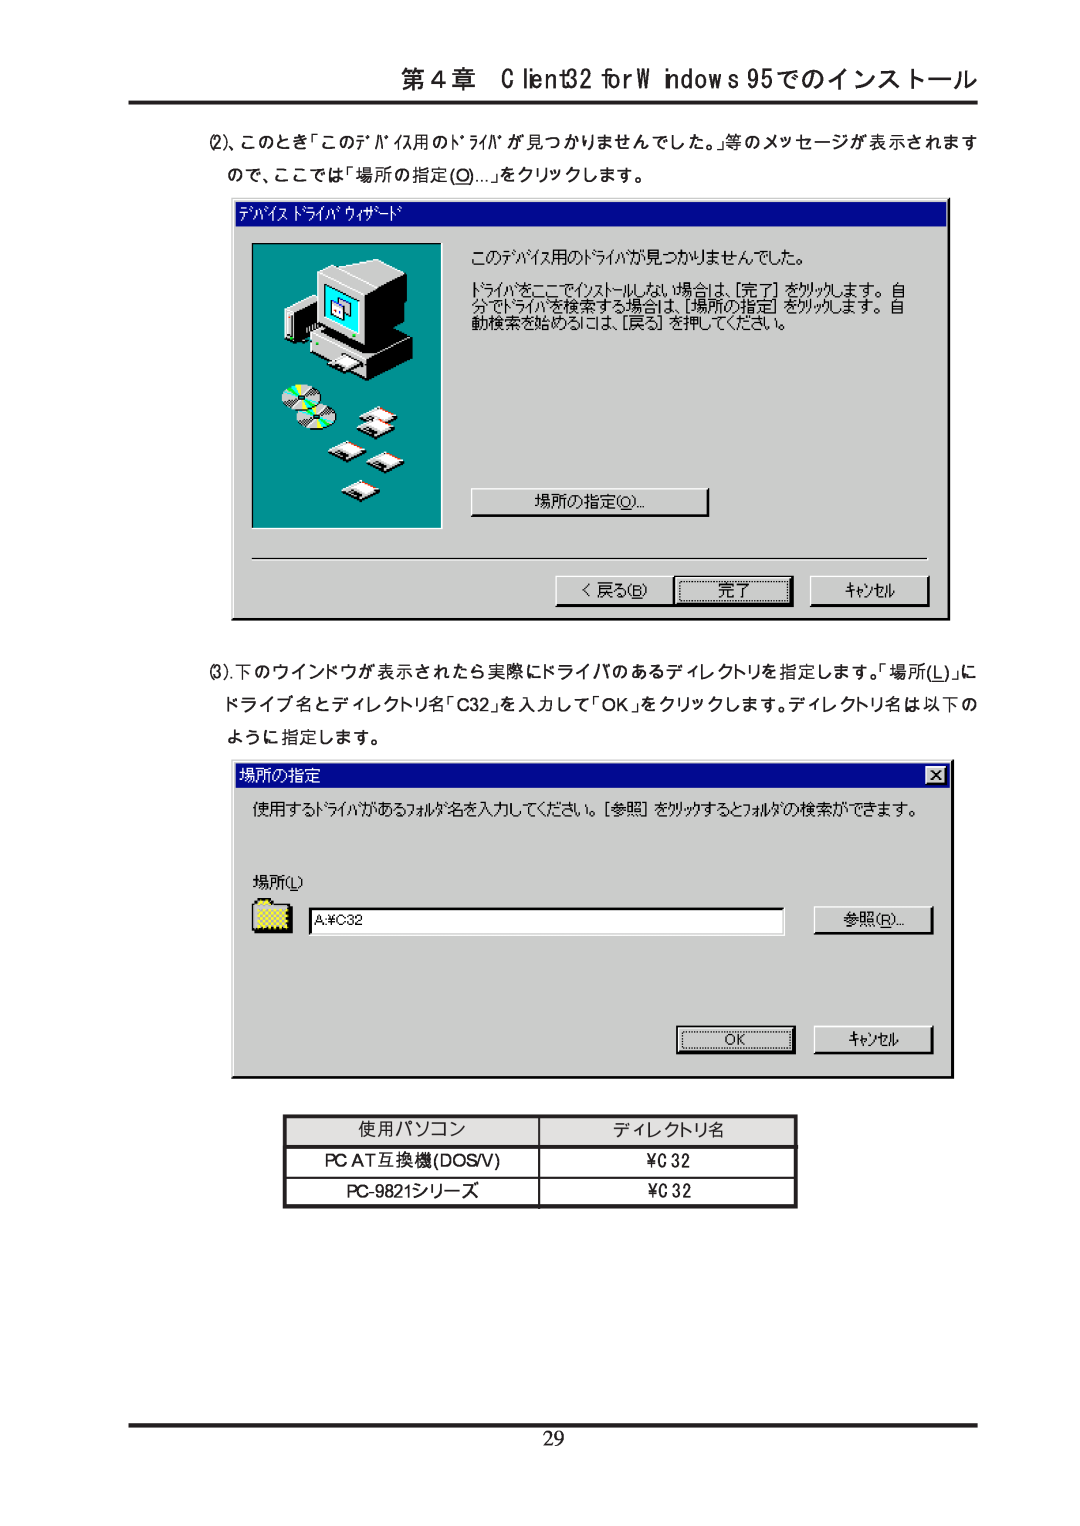 Ratoc Systems REX-R280 manual 第４章 Client32 for Windows 95でのインストール, Pc At 互換機dos/V, ¥C32, PC-9821 シリーズ 